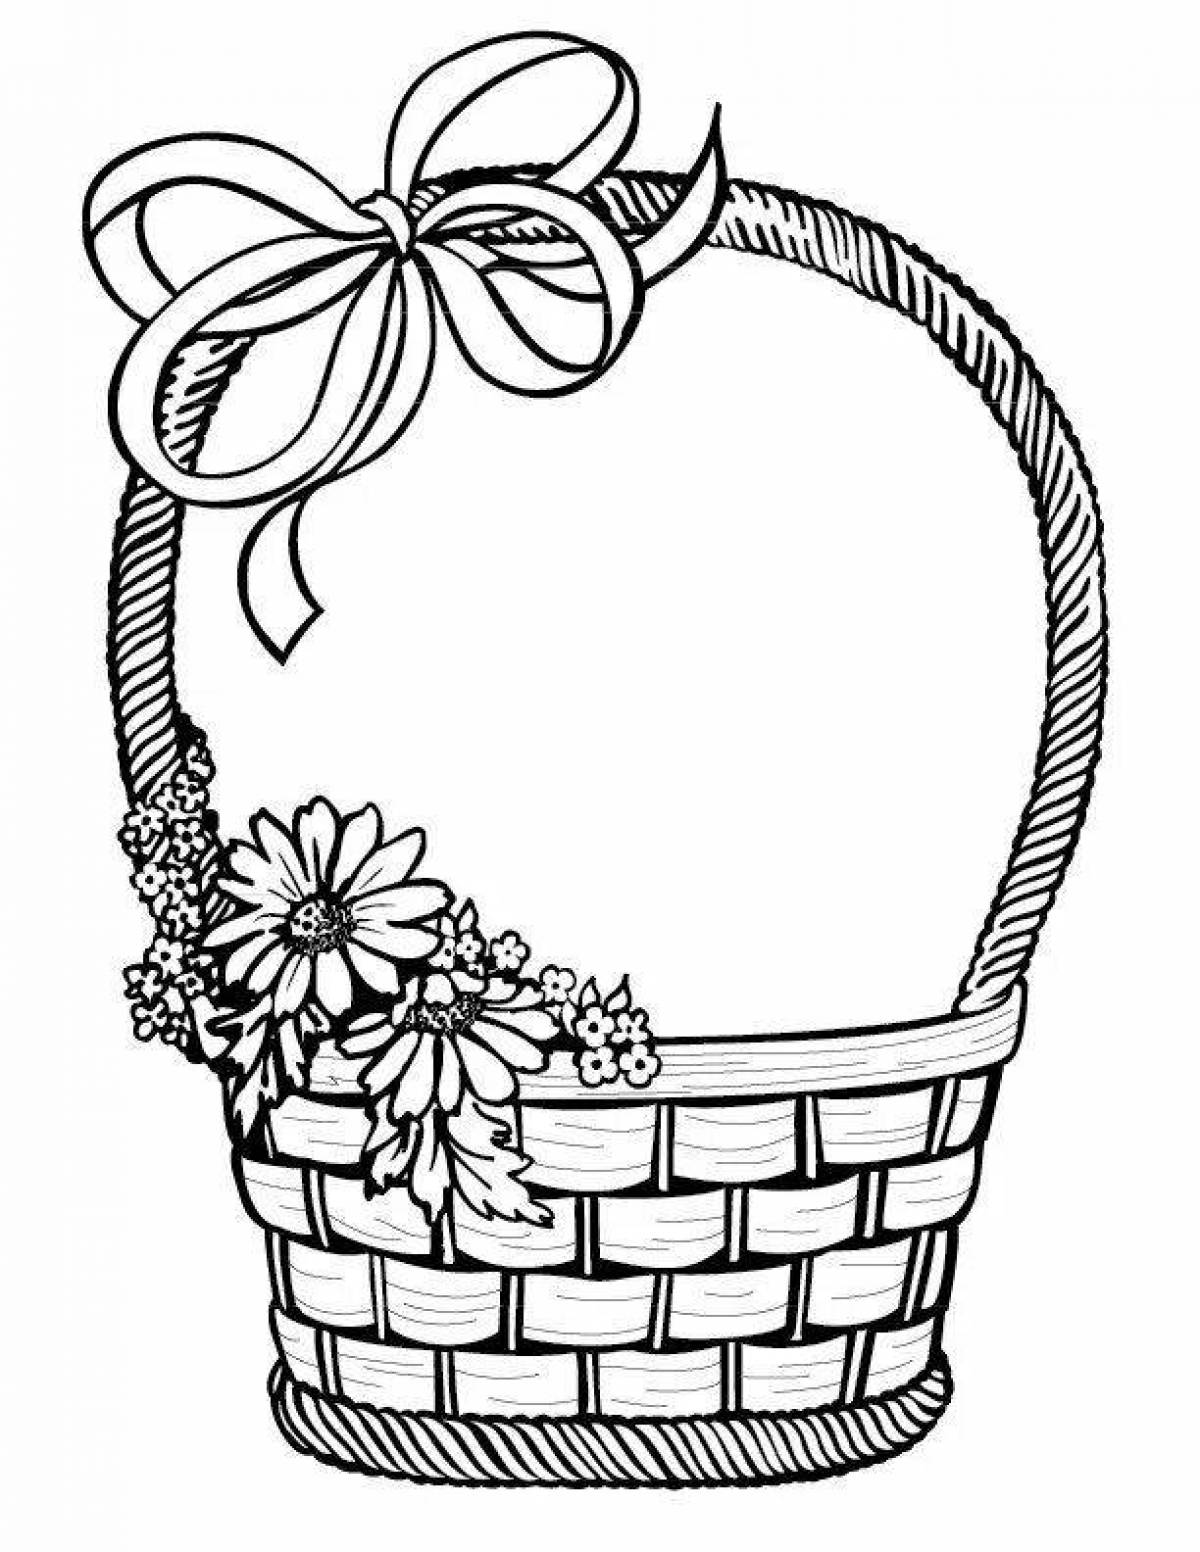 Shining Basket Coloring Page for Preschoolers